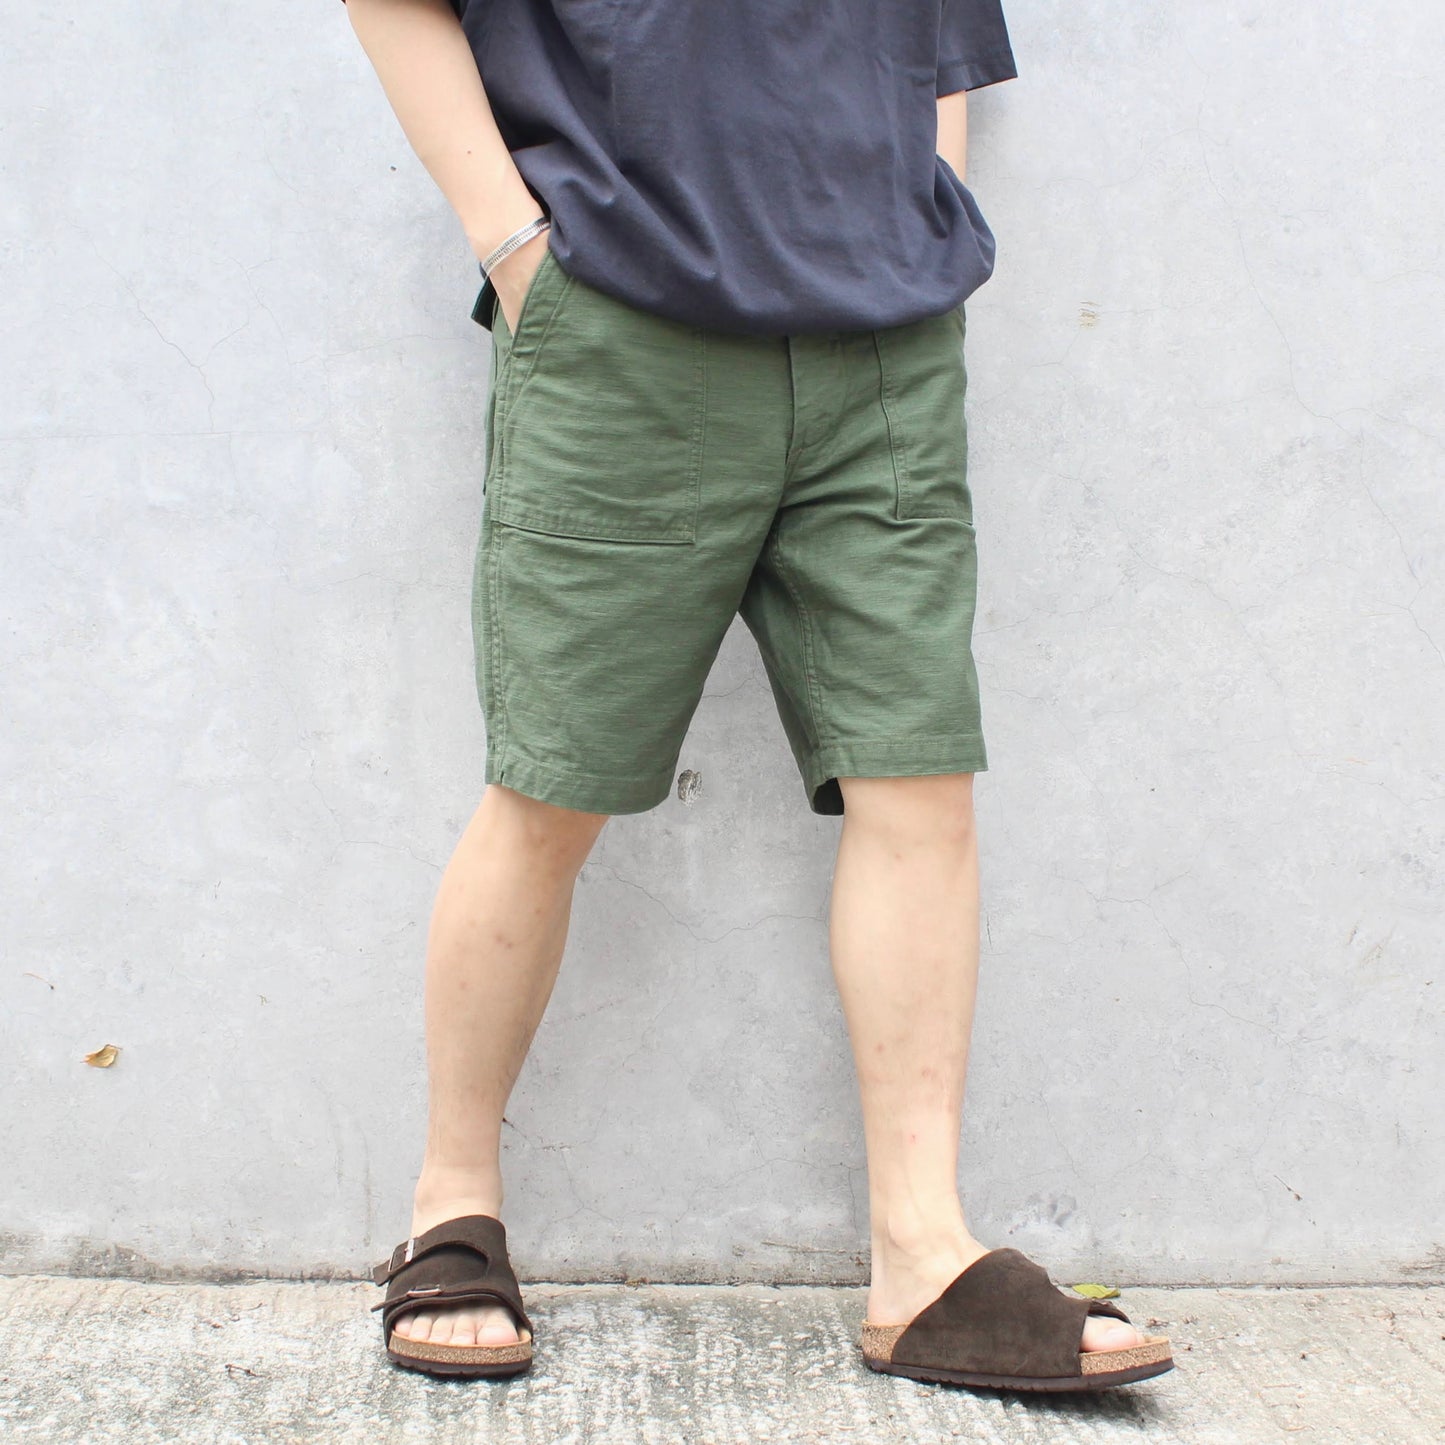 Or Slow - US ARMY FATIGUE SHORTS